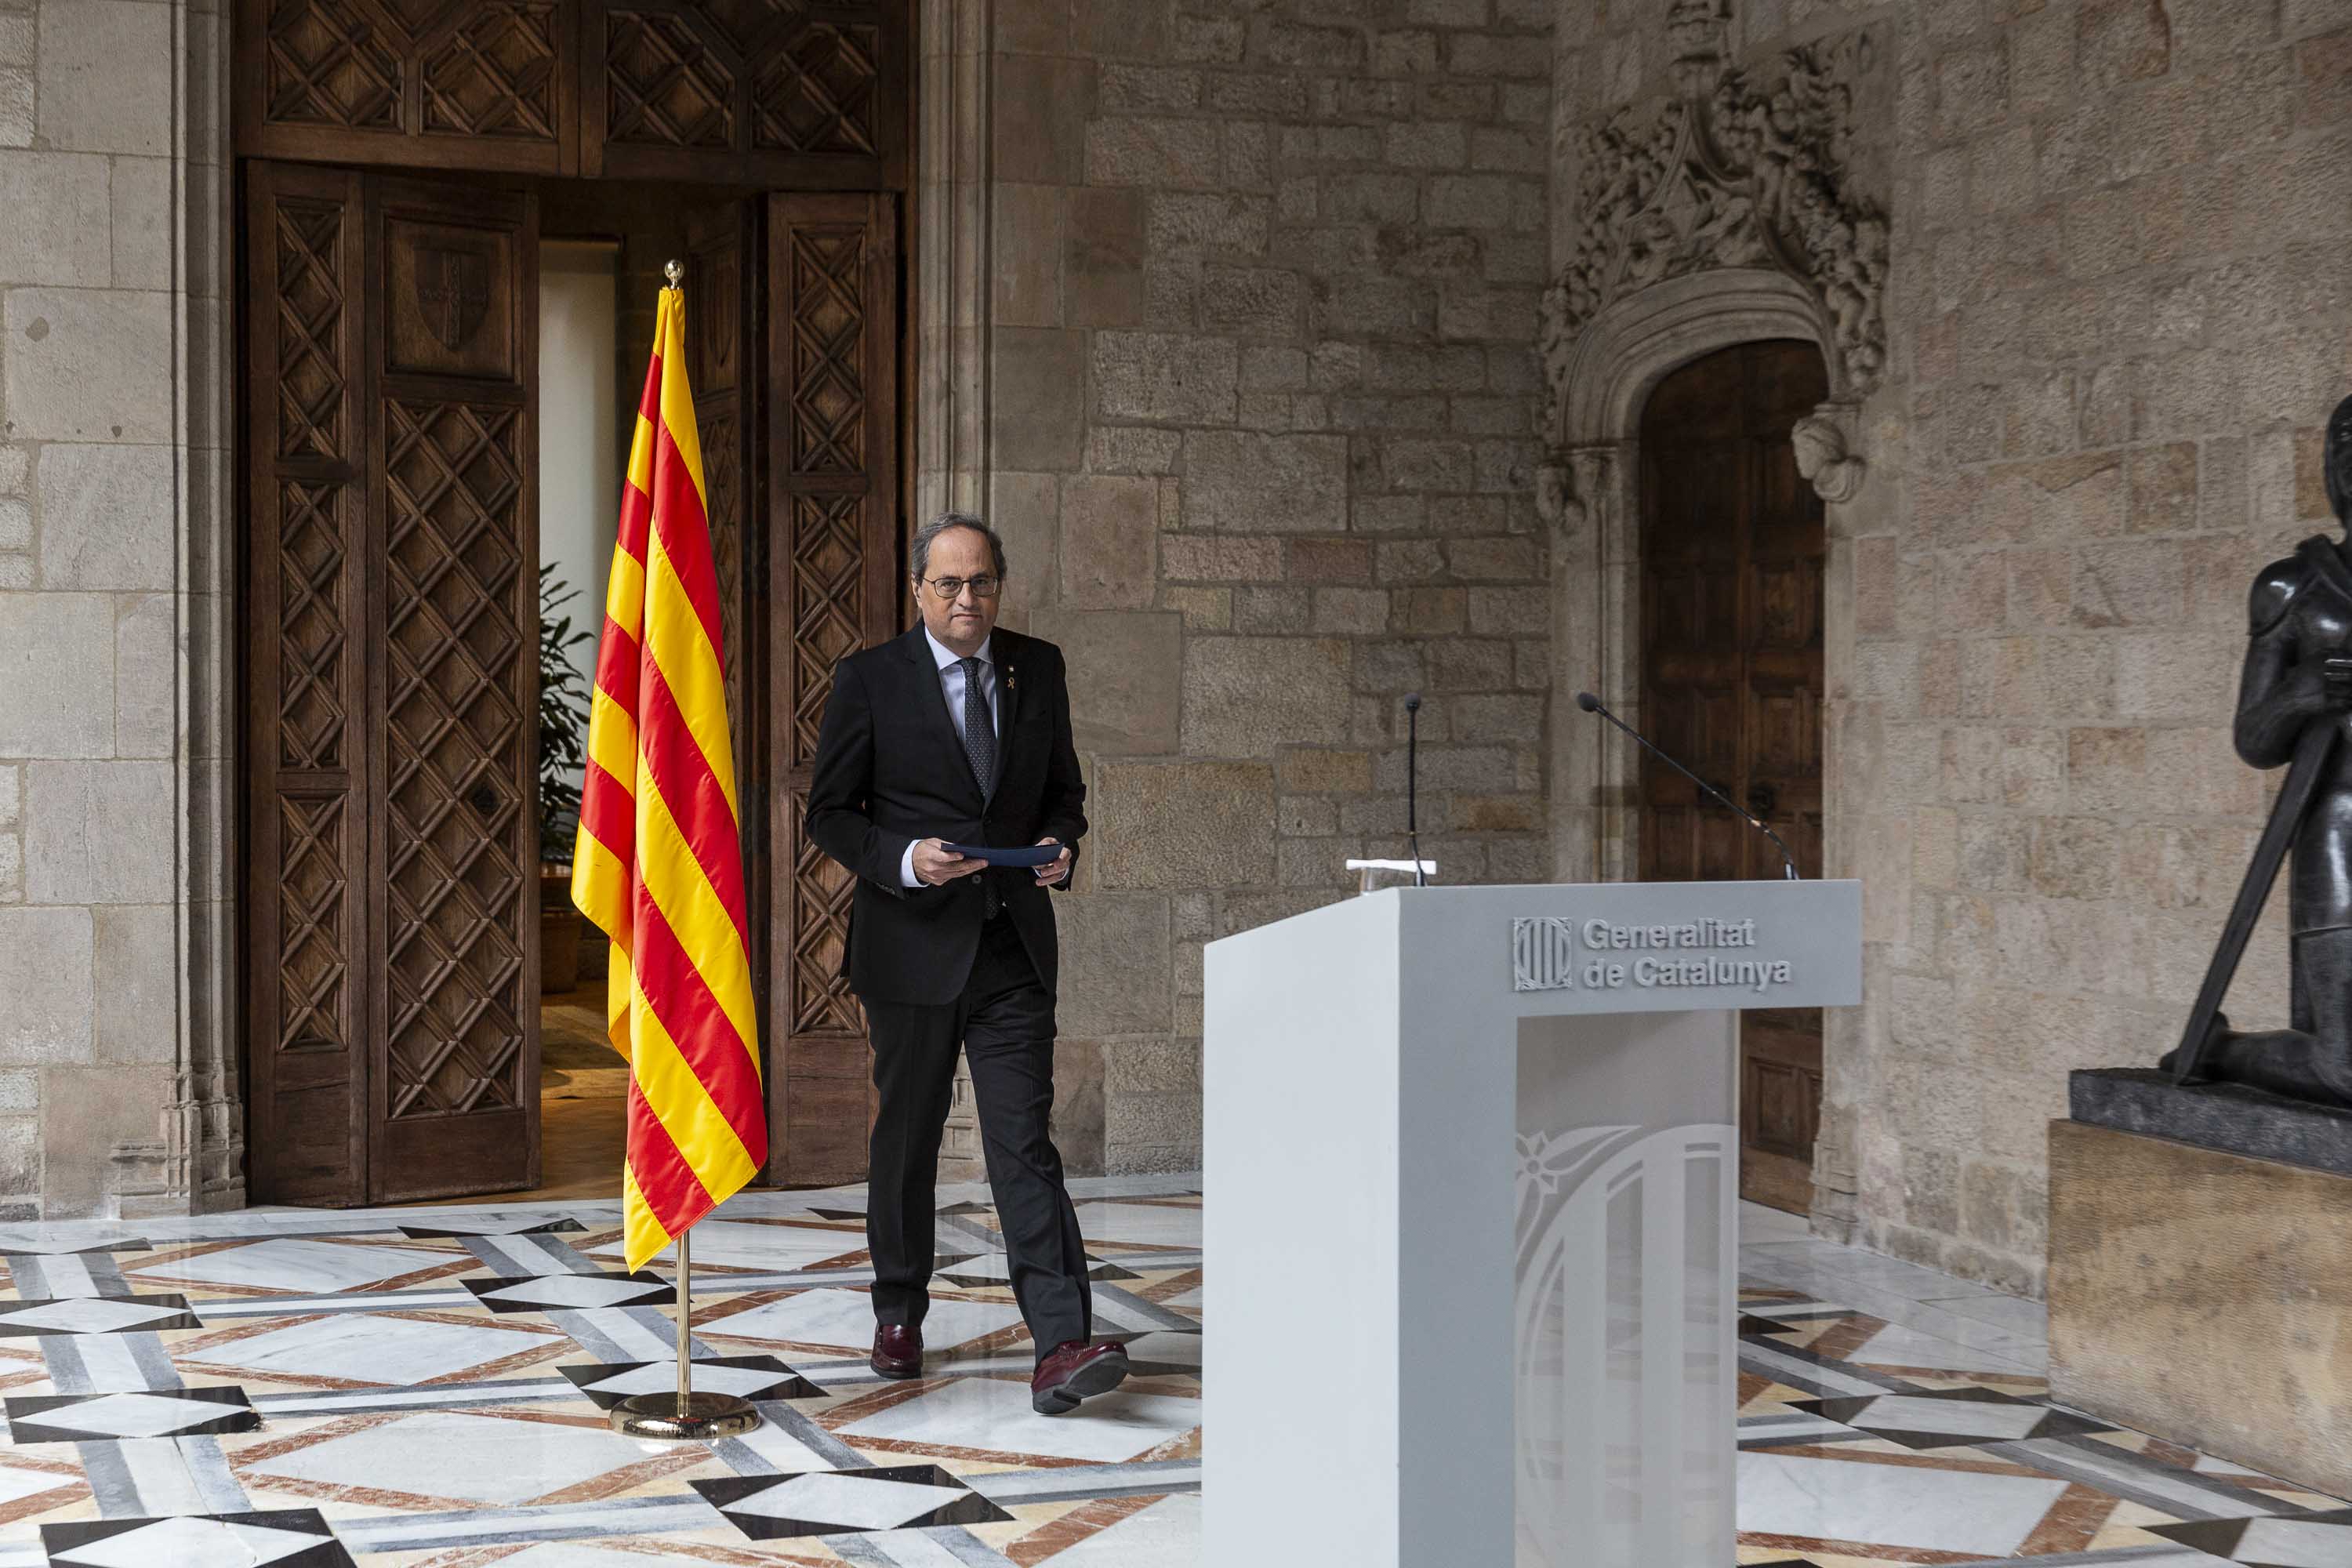 Torra says he'll call an early Catalan election once the budget is passed